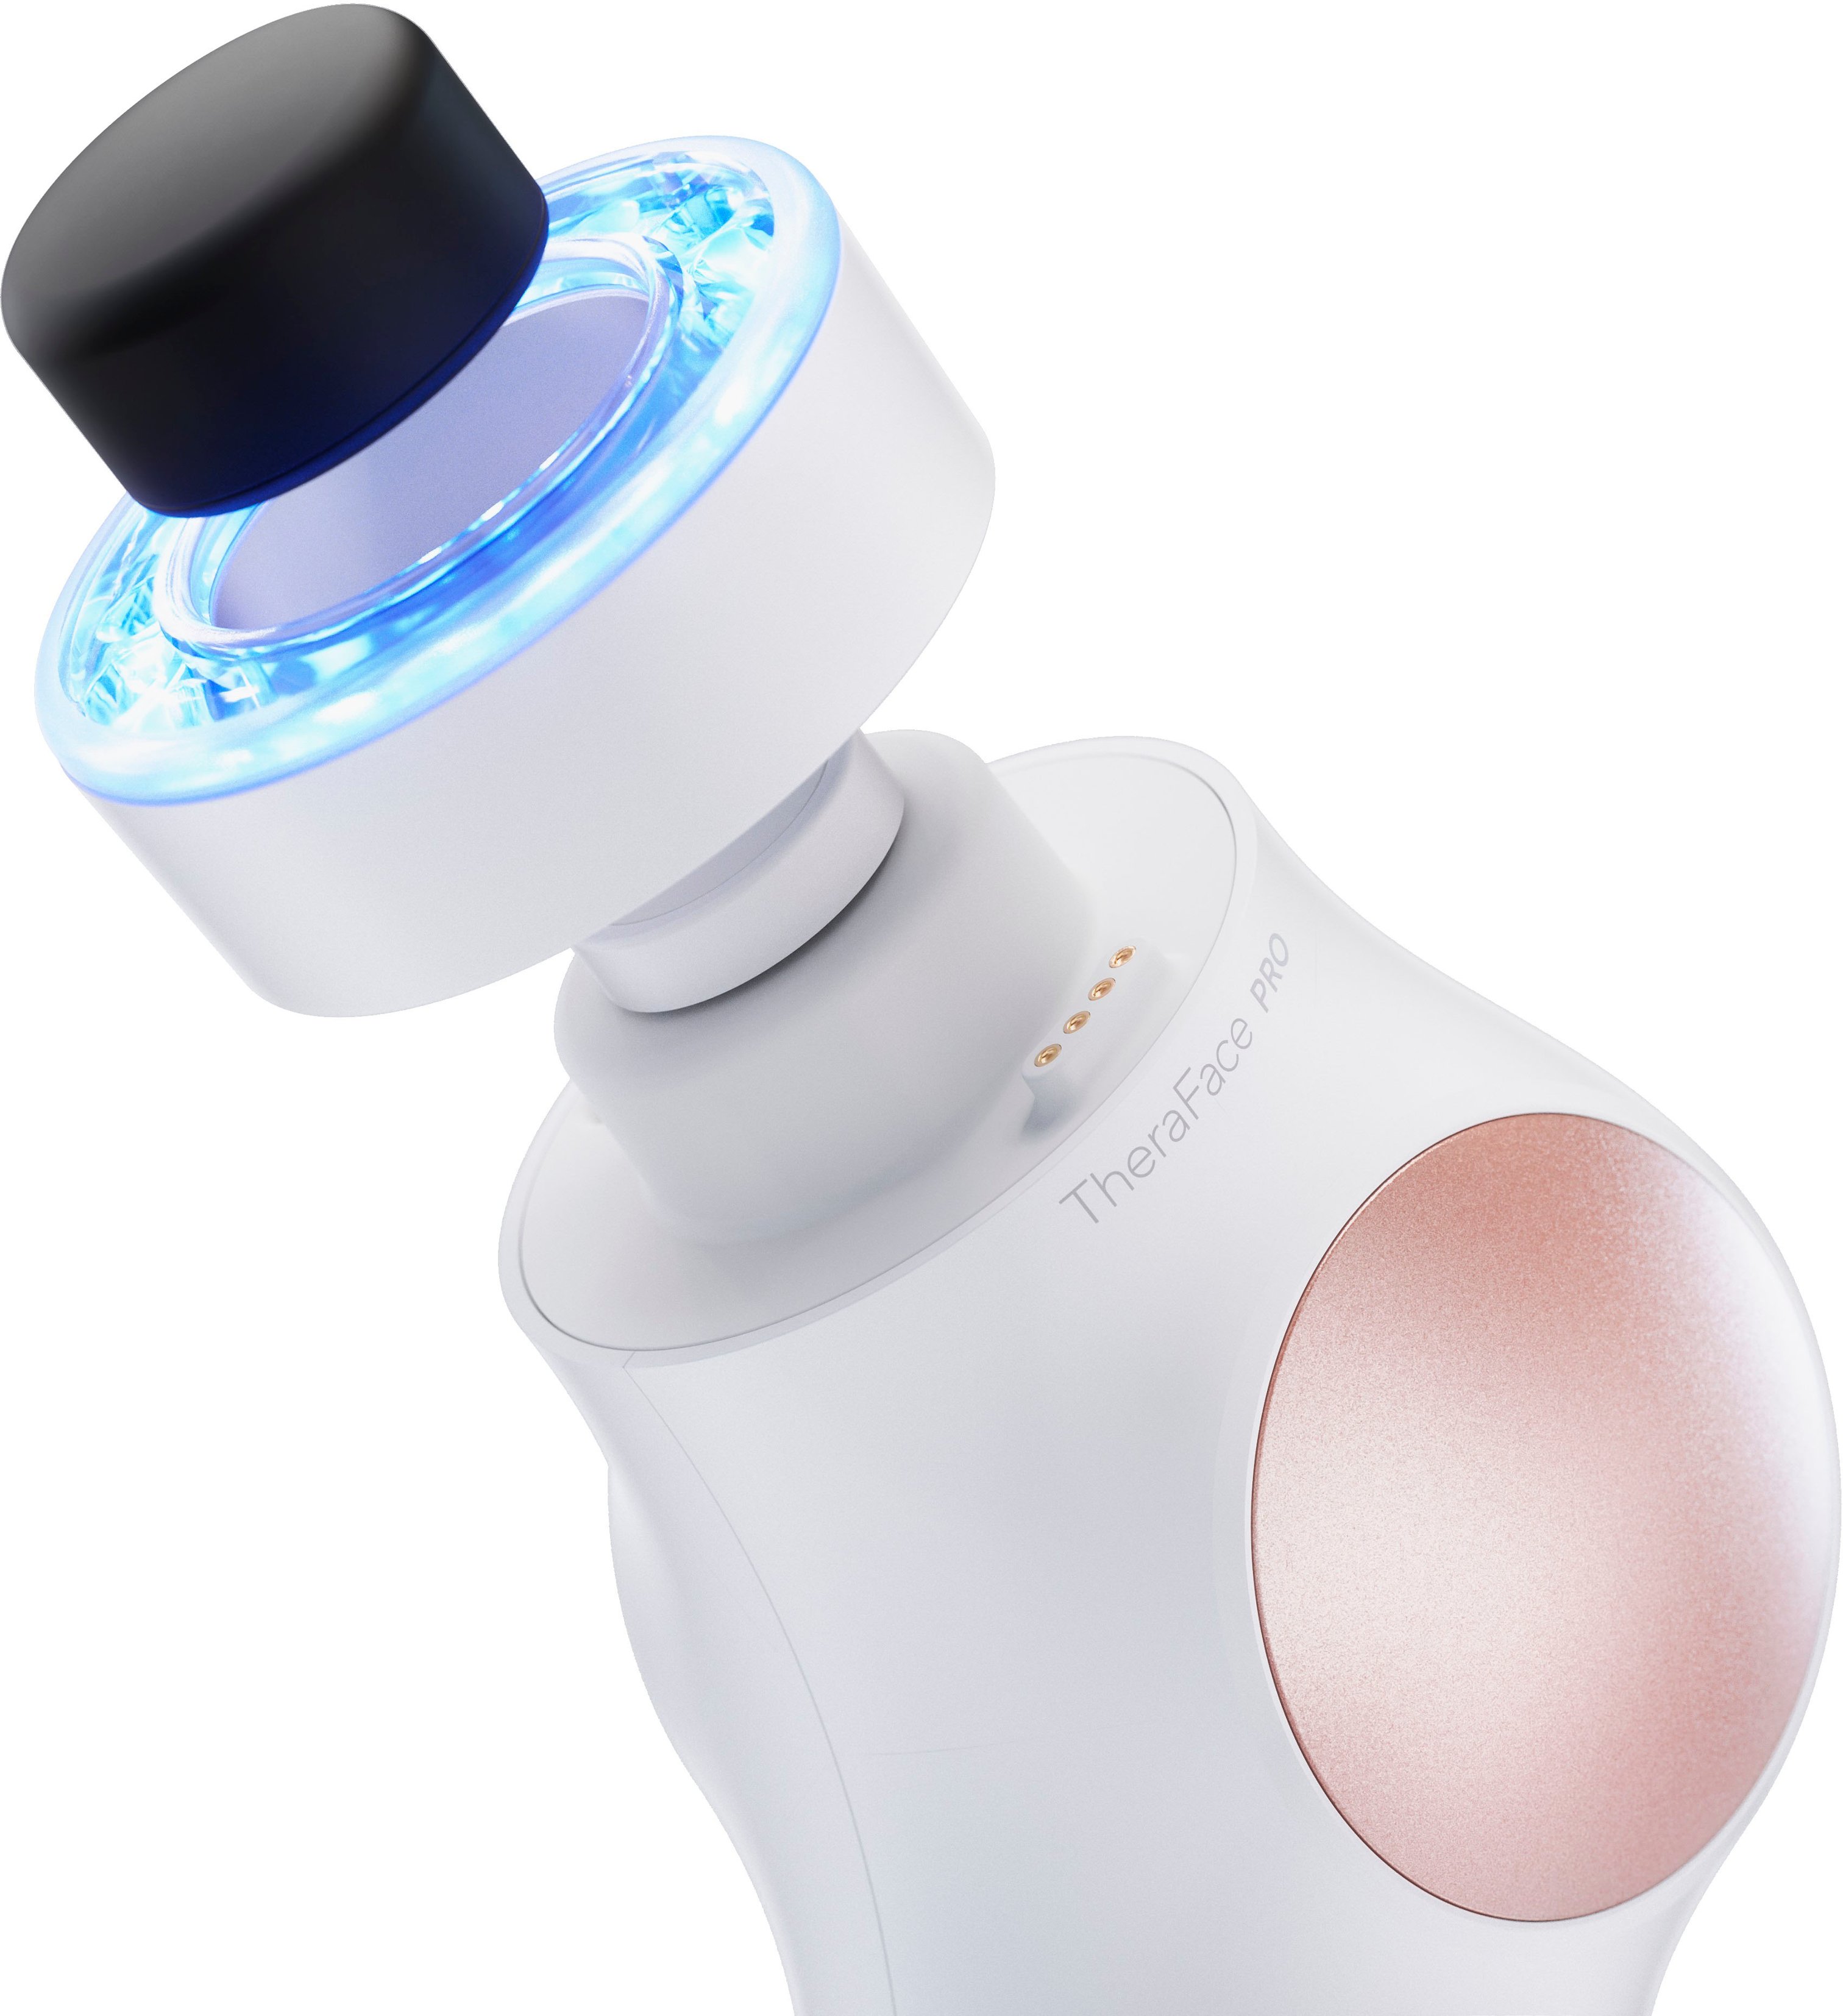 Back View: PMD Beauty - Personal Microderm Pro Device - Teal